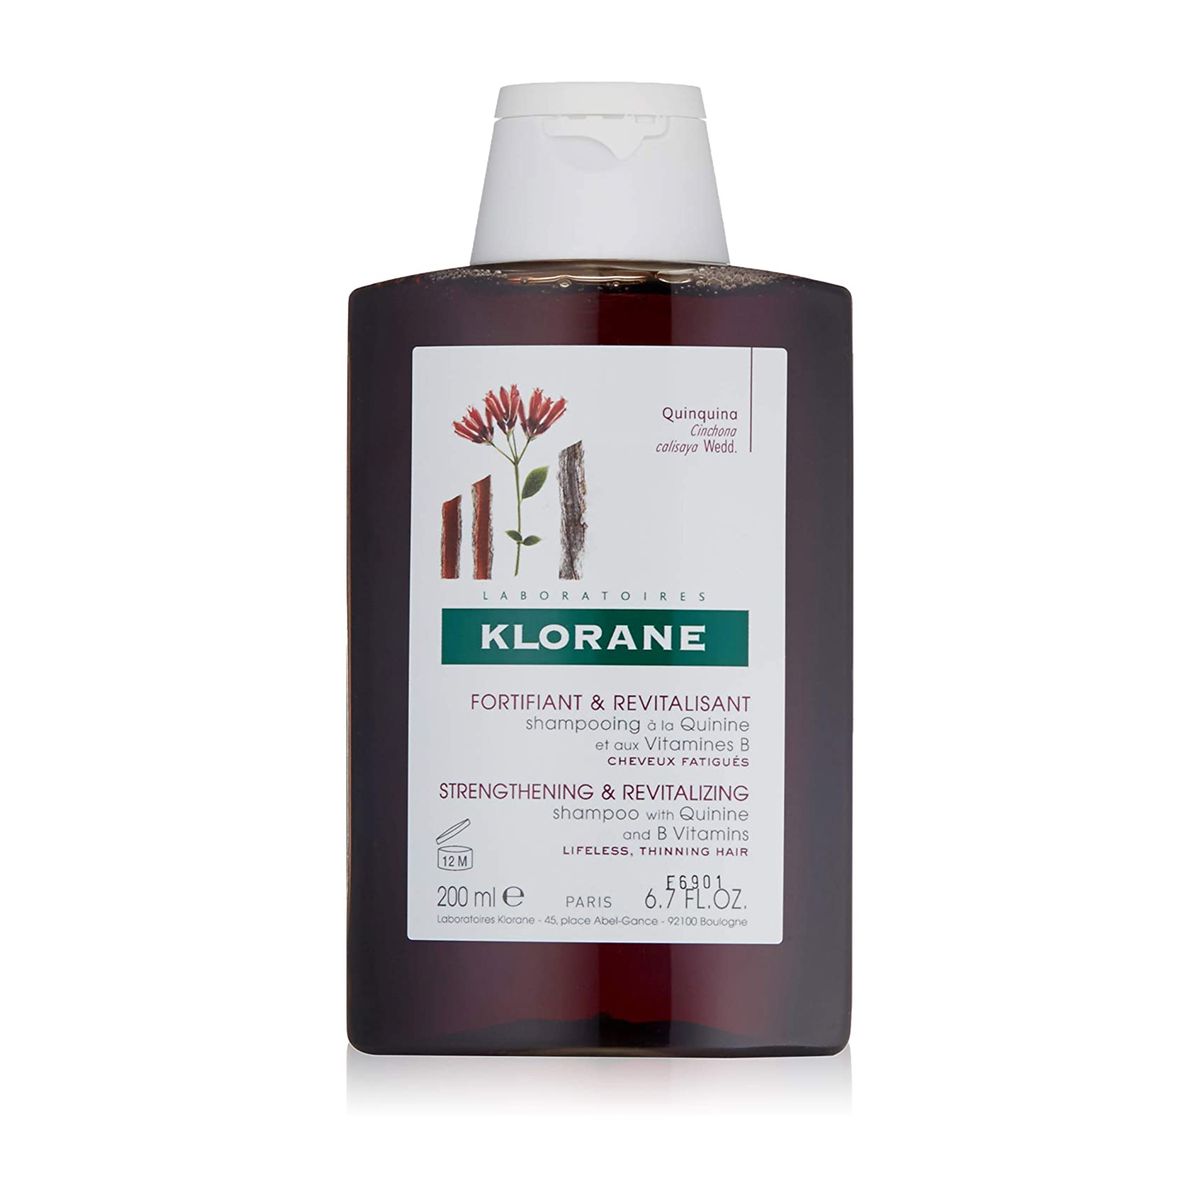 bottle of Klorane Shampoo with Quinine and B Vitamins for Thinning Hair